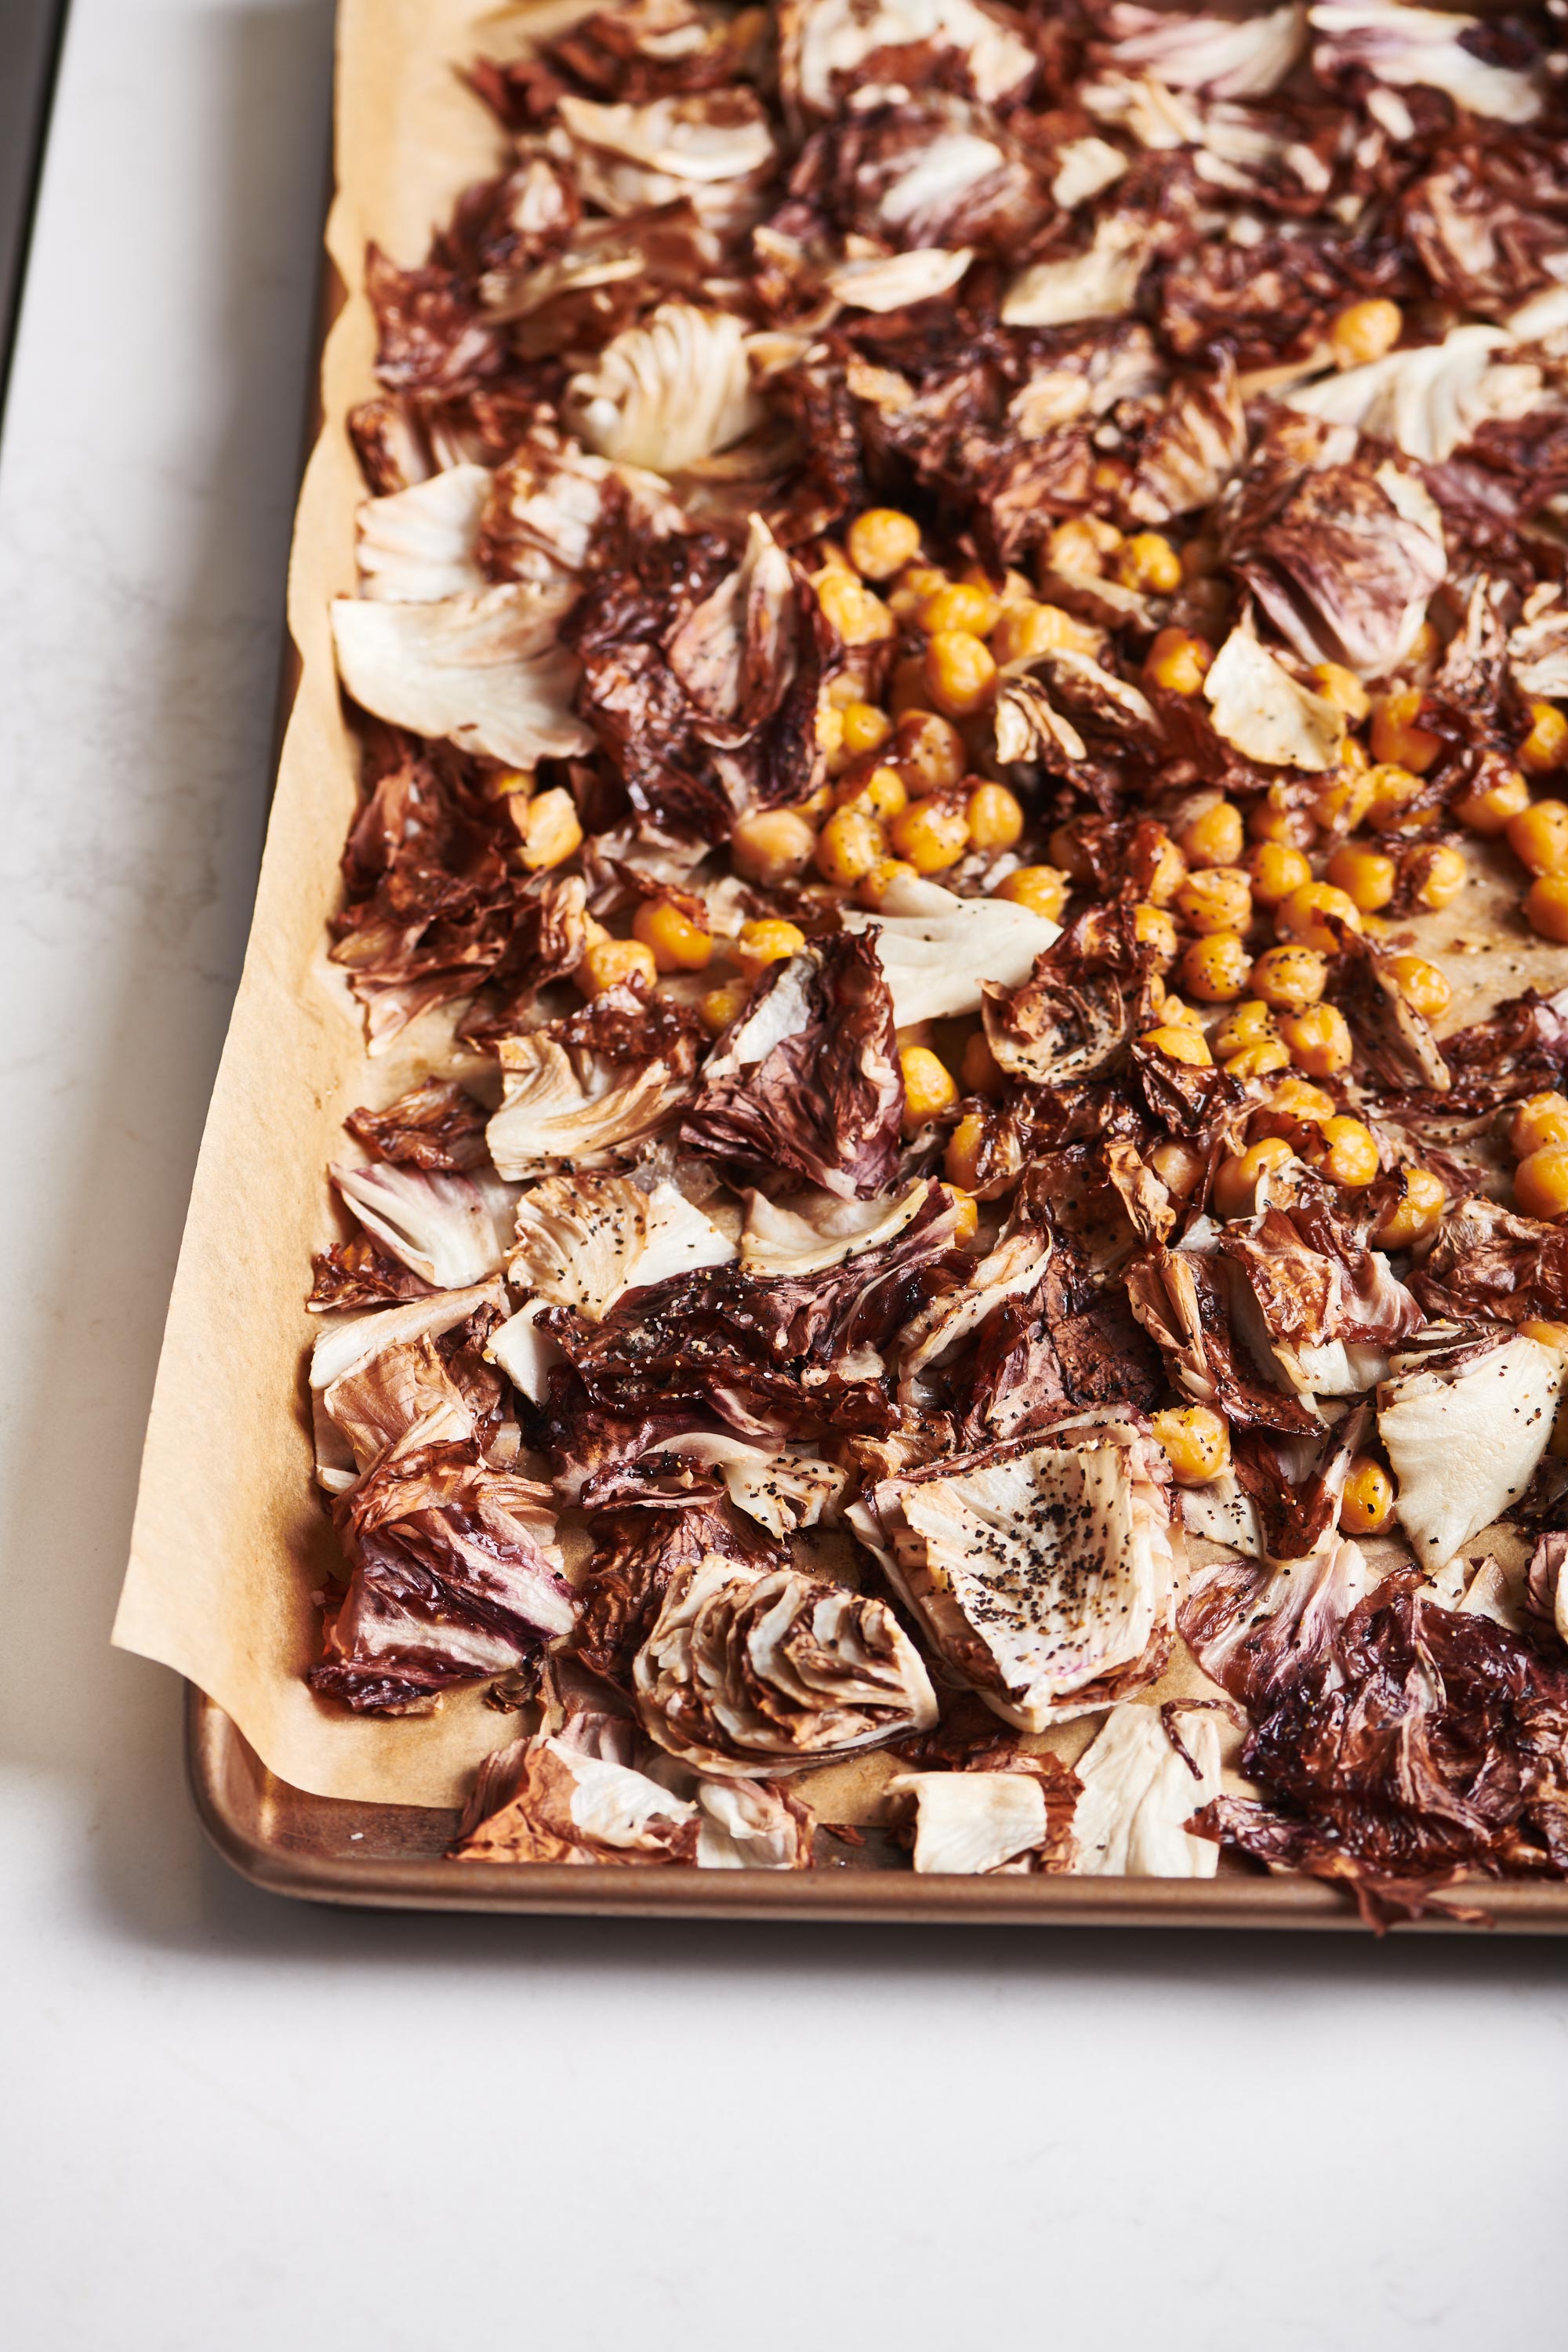 Roasted Chickpeas and radicchio on a lined baking sheet.